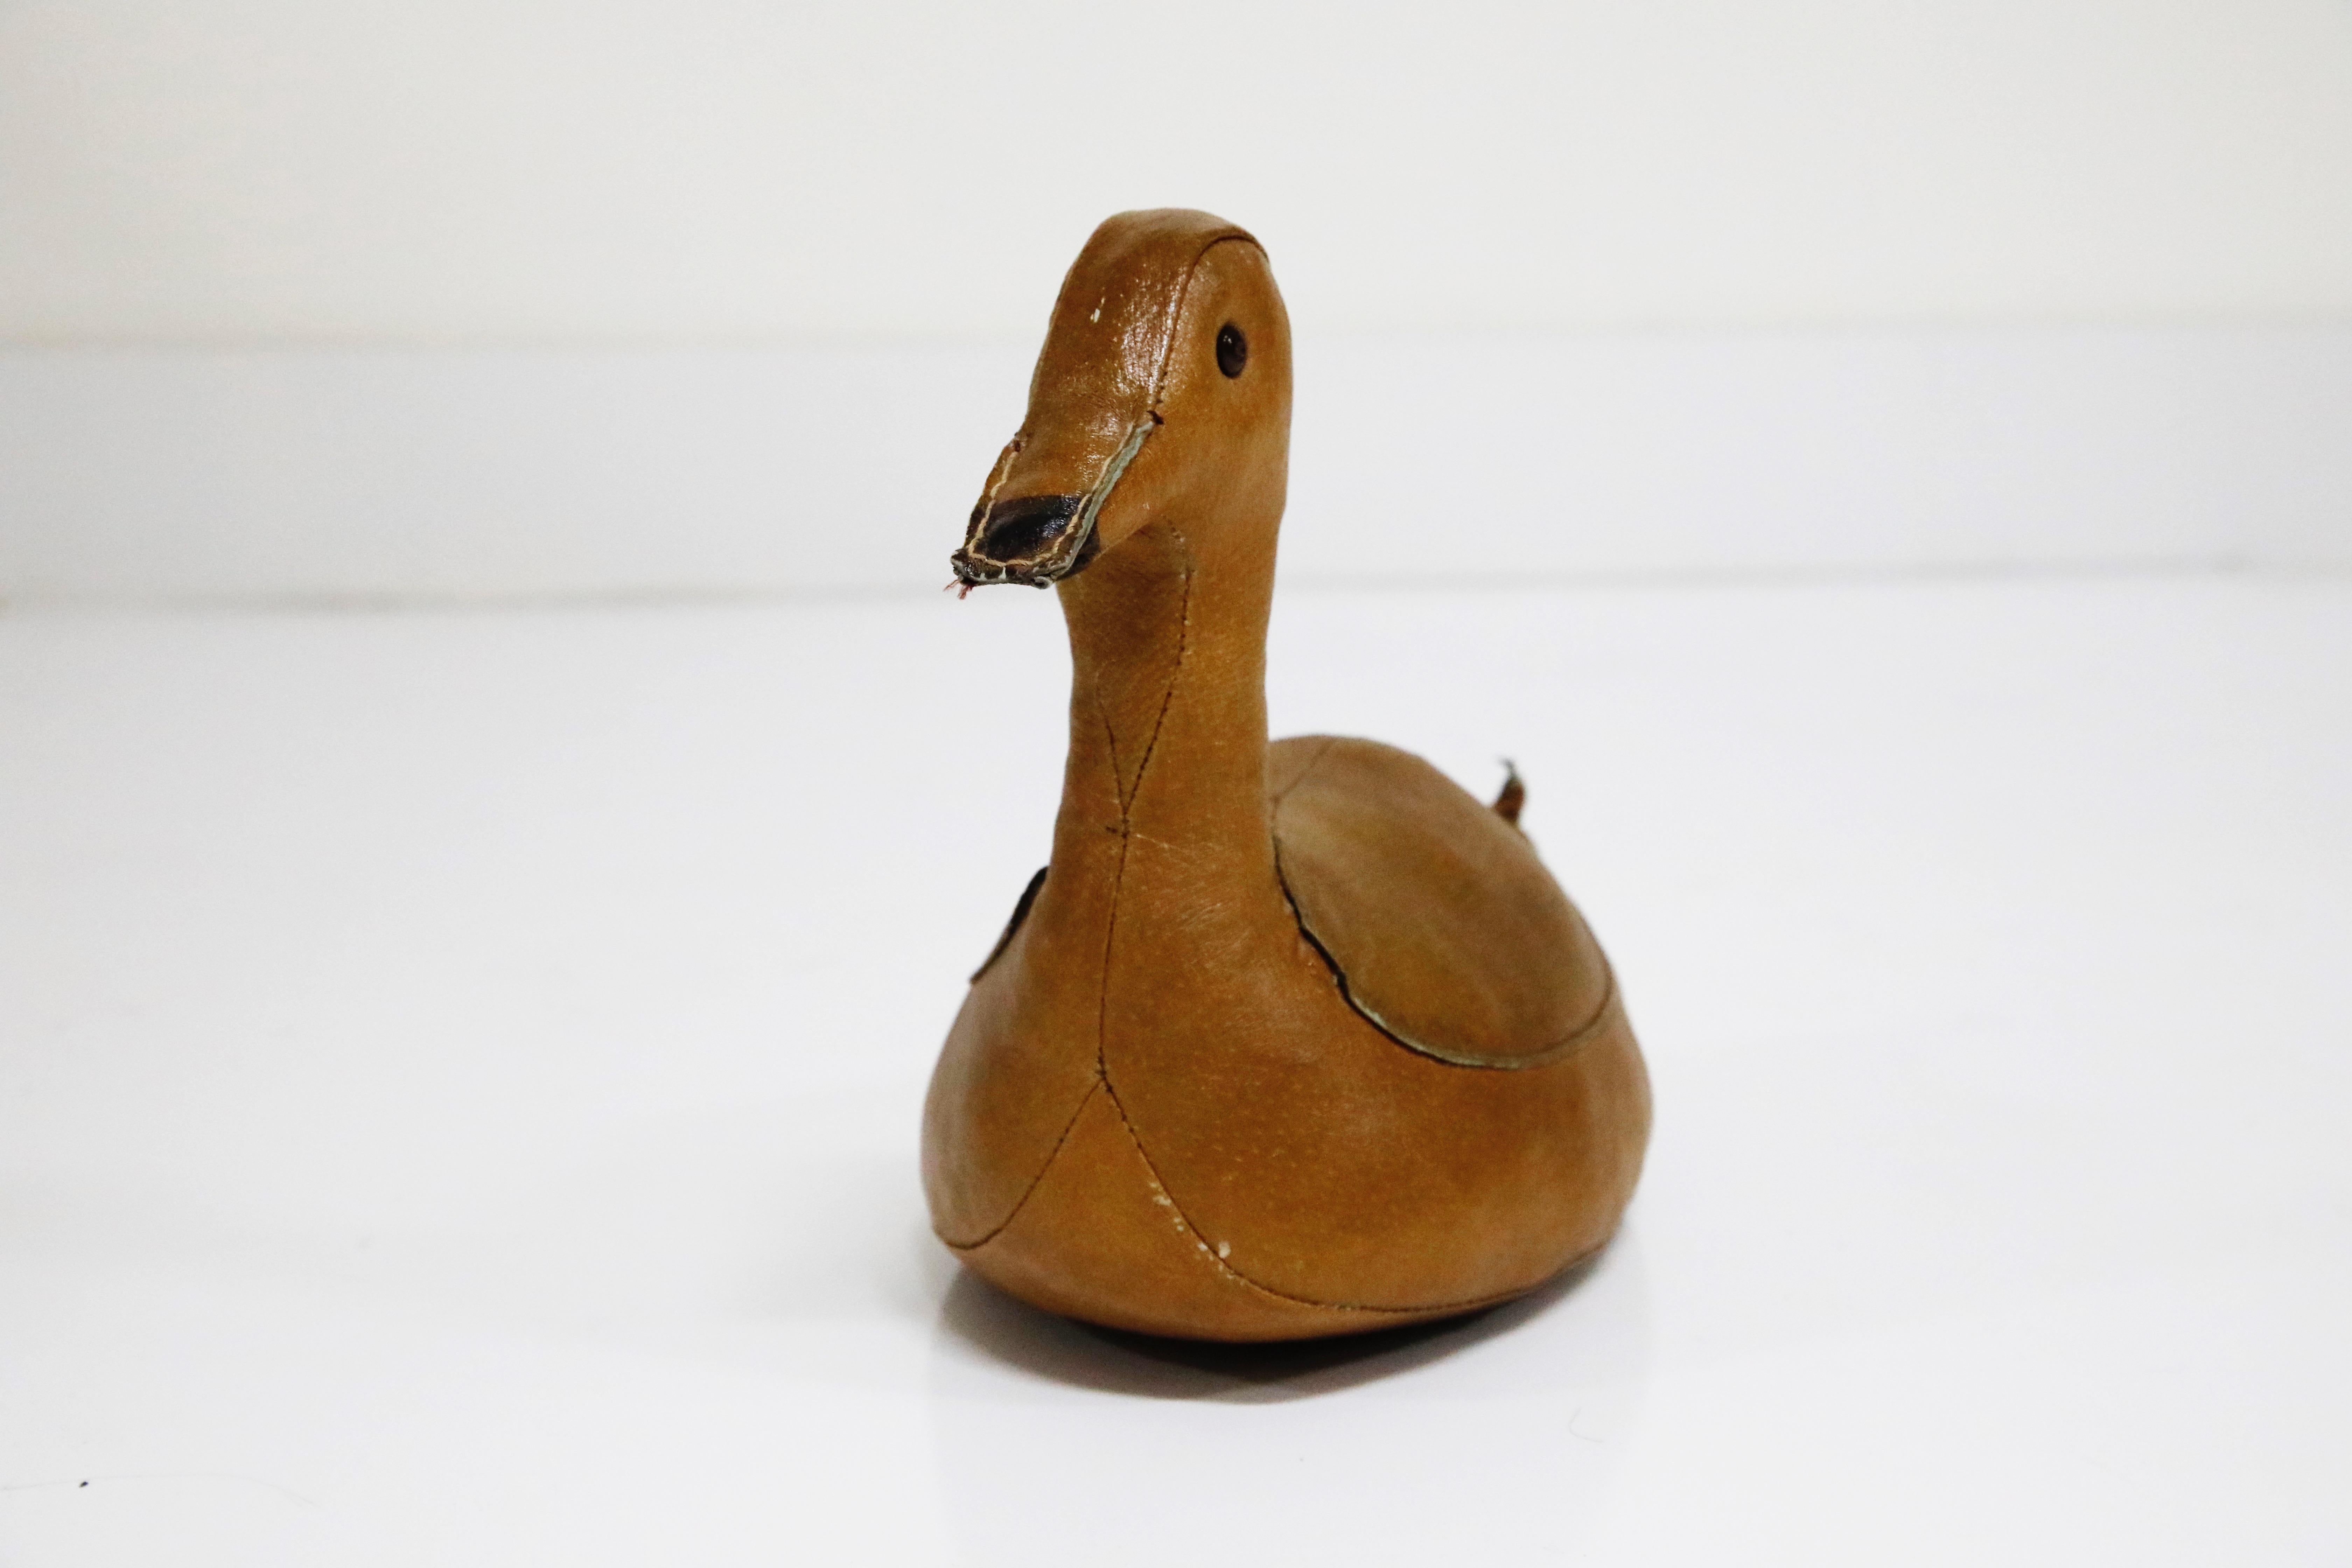 A wonderful example of the leather duck doorstop (or paper weight) by Dimitri Omersa for Abercrombie and Fitch, circa 1950s. This is a collectible early production example and ready to be used as a floor door stop or consider using it as a tabletop